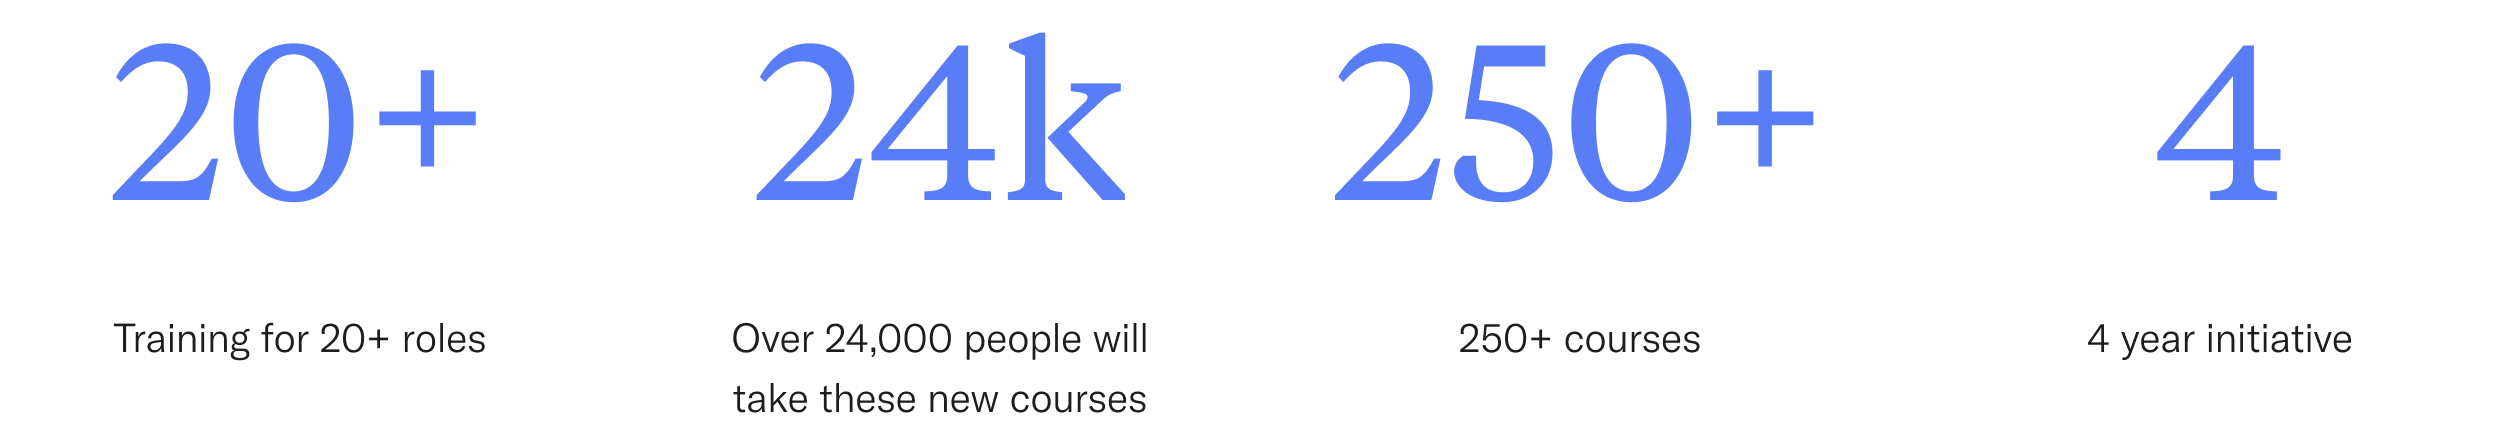 Large statistics of the project including, Training for 20+ roles, Over 24,000 people will take these new courses, 250+ courses, 4-year initiative.